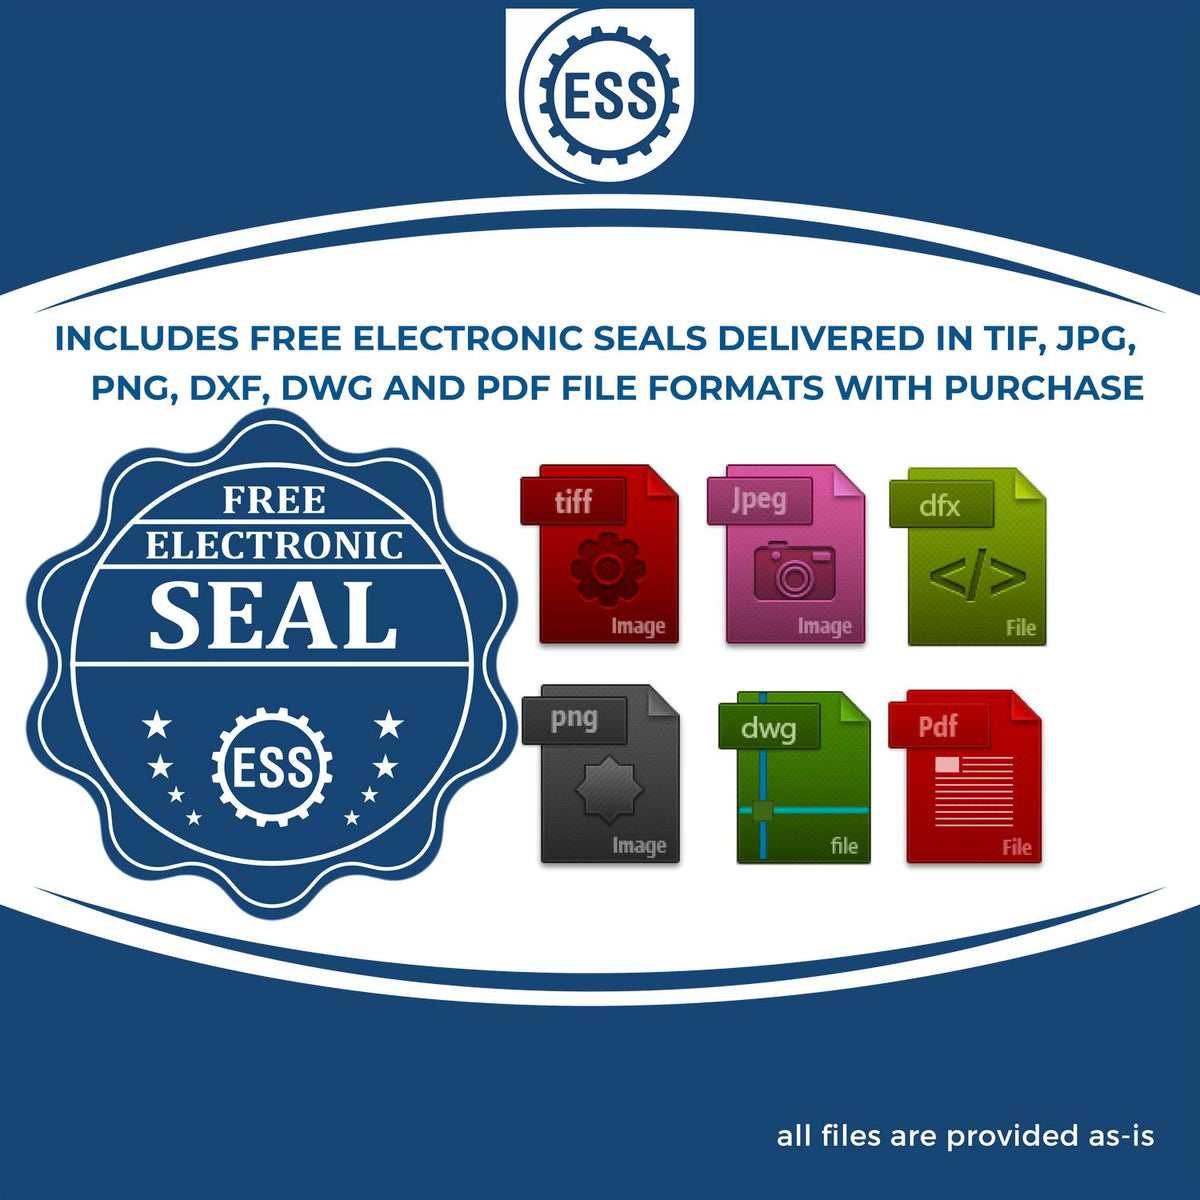 An infographic for the free electronic seal for the Premium MaxLight Pre-Inked District of Columbia Landscape Architectural Stamp illustrating the different file type icons such as DXF, DWG, TIF, JPG and PNG.